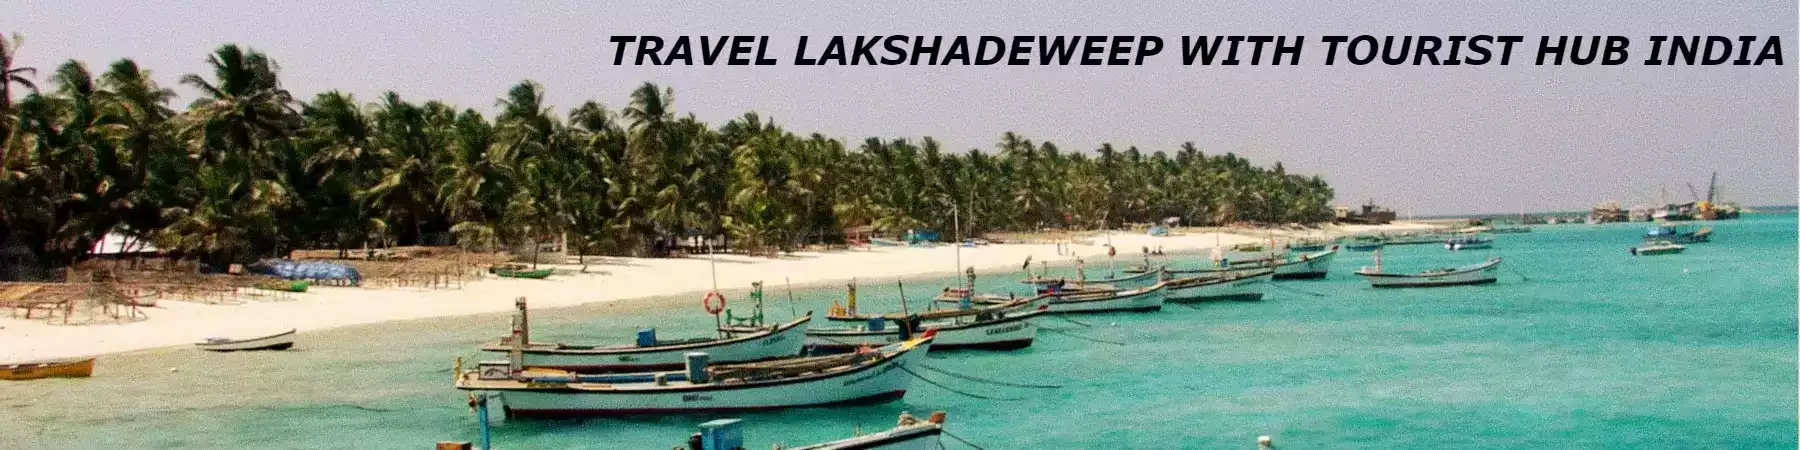 Lakshadweep holiday packages from Kerala with Tourist Hub India - The Best Lakshadweep Travel Agency